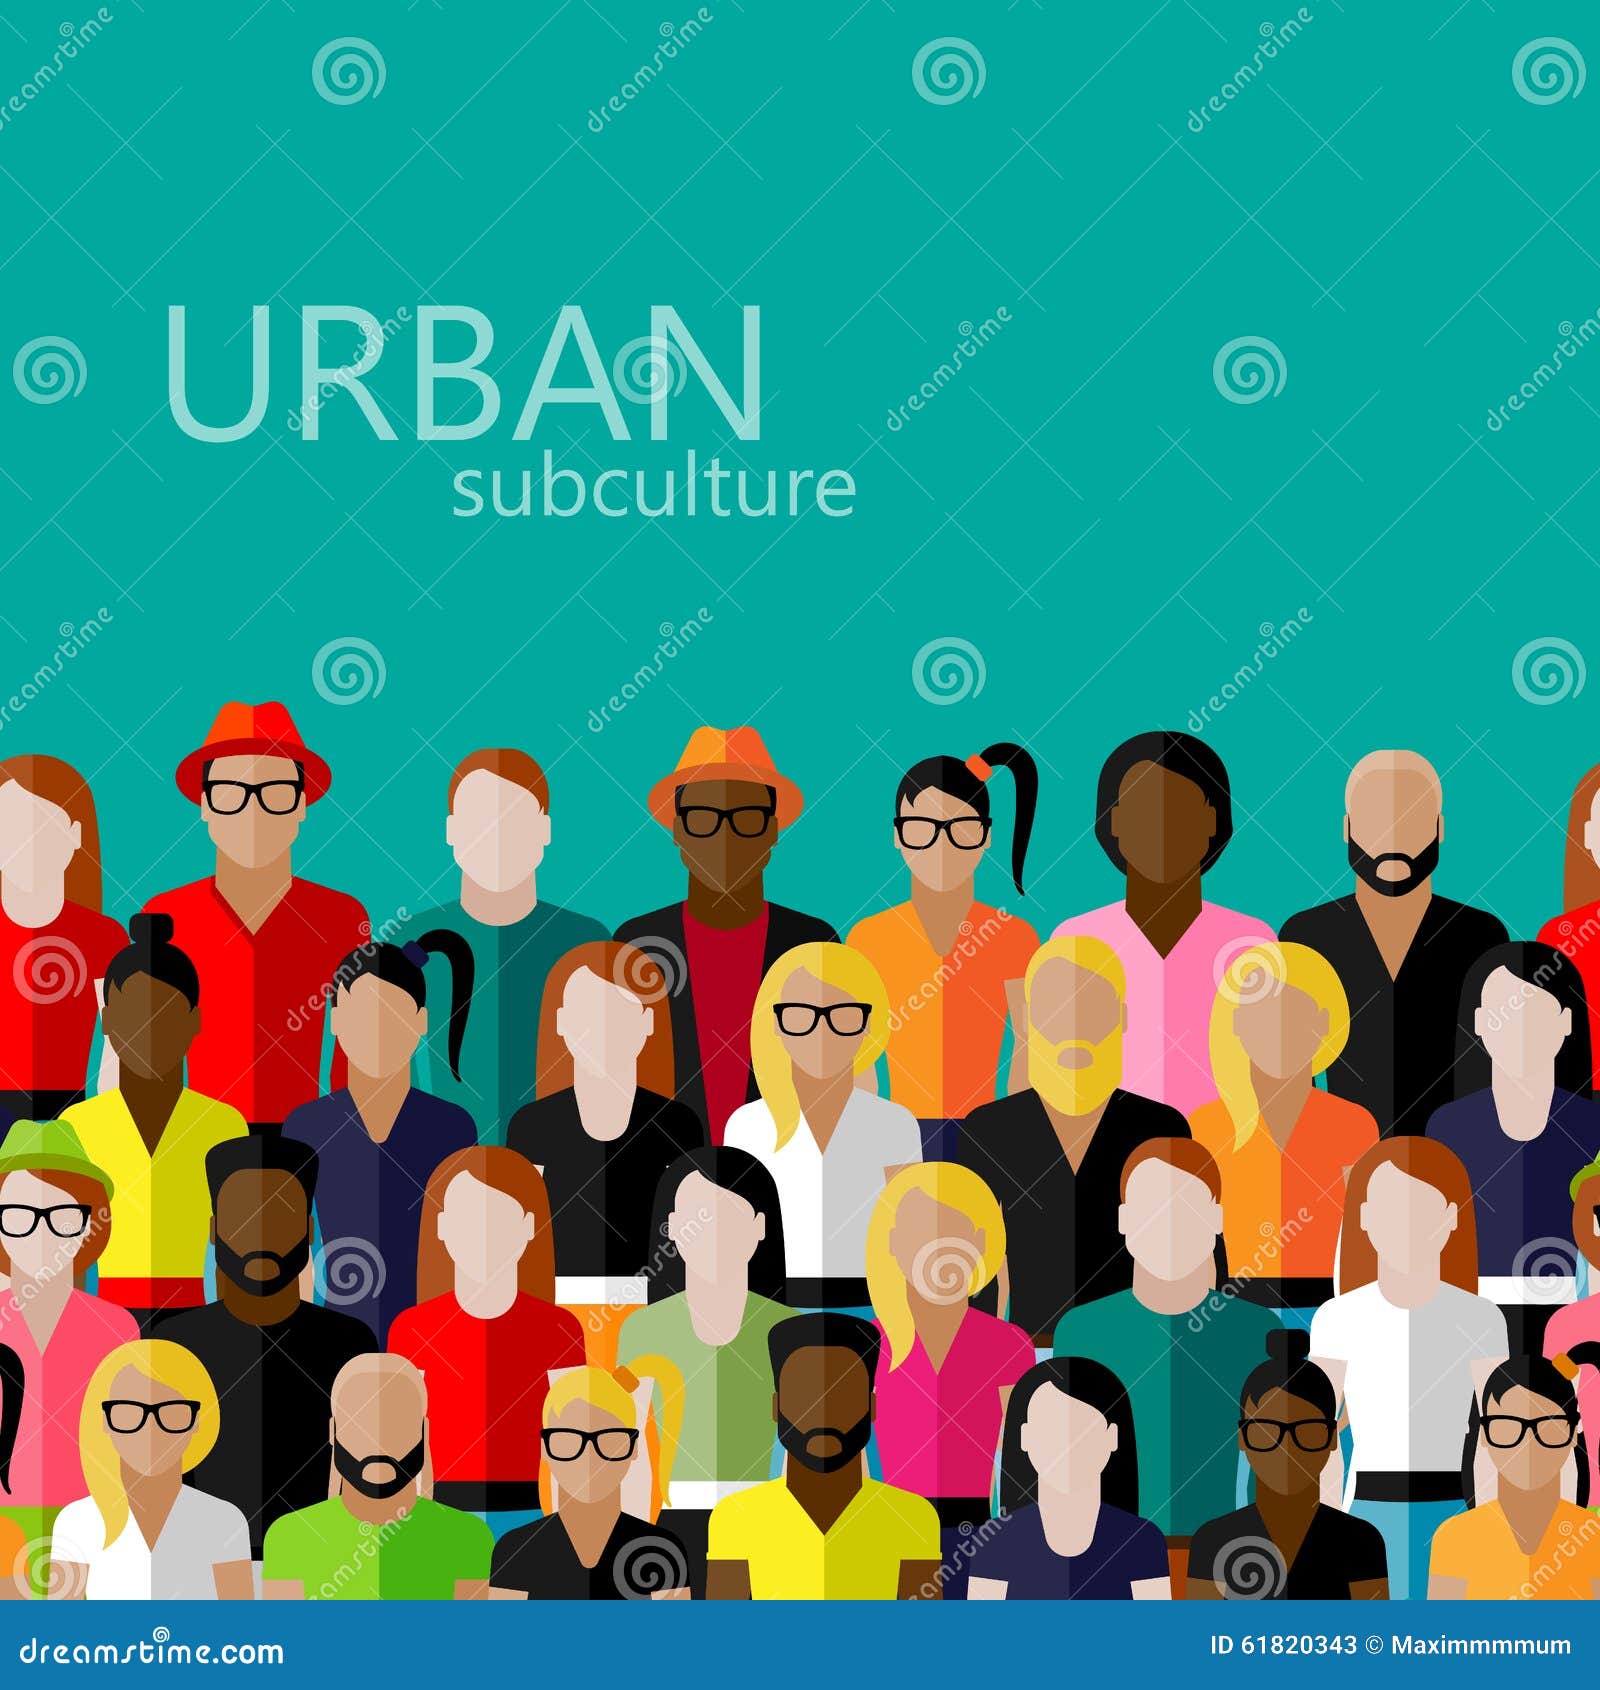 flat  of society members with a large group of men and women. population. urban subculture concept